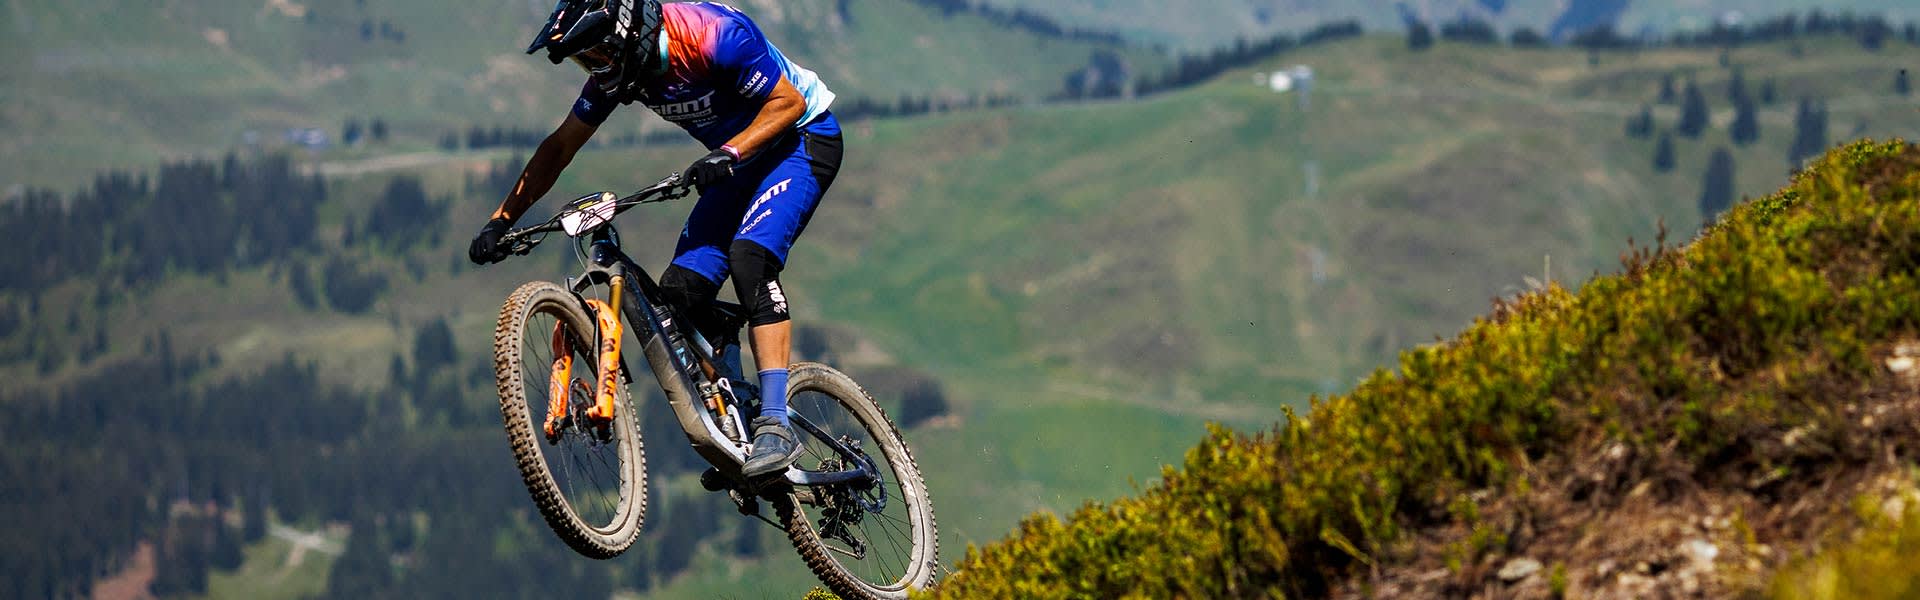 Ultimate Speed  Giant Bicycles Official site